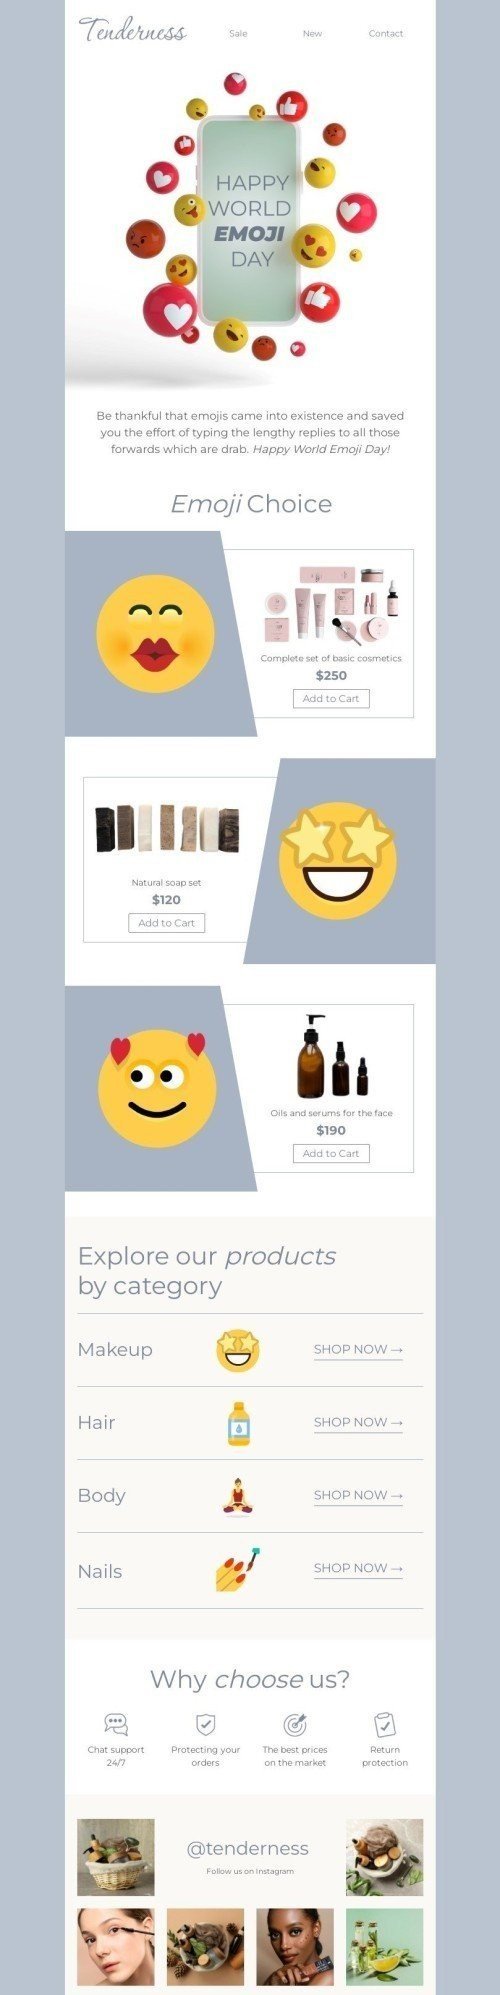 World Emoji Day Email Template "Emoji is everywhere" for Beauty & Personal Care industry desktop view